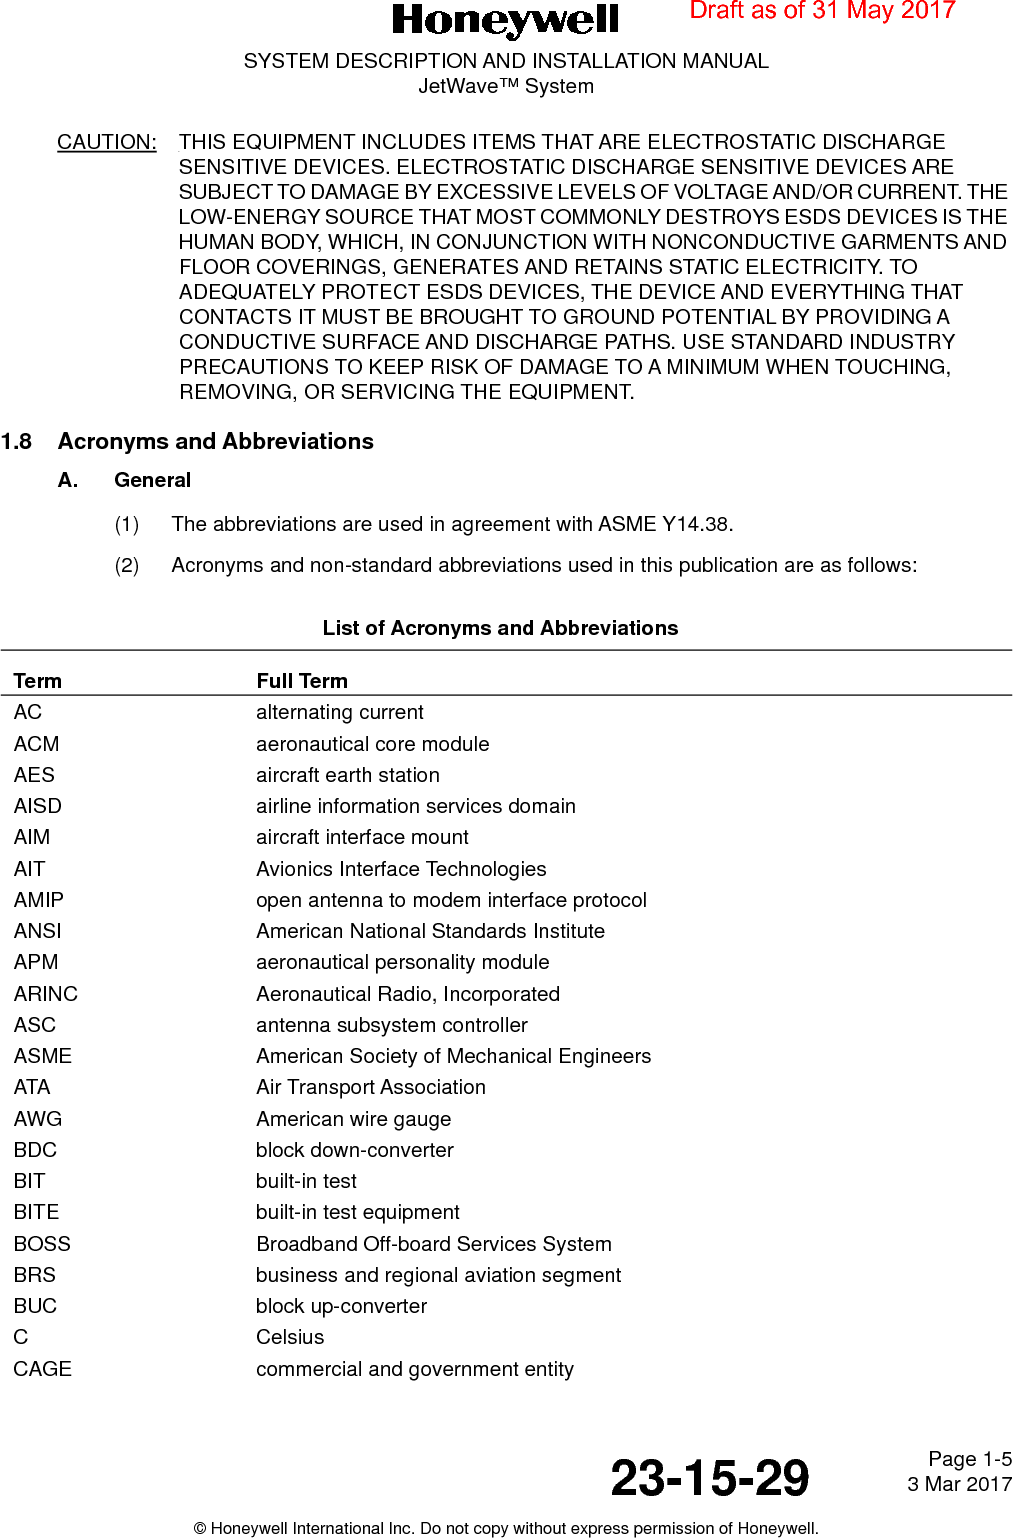 Page 1-5 3 Mar 201723-15-29SYSTEM DESCRIPTION AND INSTALLATION MANUALJetWave™ System© Honeywell International Inc. Do not copy without express permission of Honeywell.CAUTION: THIS EQUIPMENT INCLUDES ITEMS THAT ARE ELECTROSTATIC DISCHARGE SENSITIVE DEVICES. ELECTROSTATIC DISCHARGE SENSITIVE DEVICES ARE SUBJECT TO DAMAGE BY EXCESSIVE LEVELS OF VOLTAGE AND/OR CURRENT. THE LOW-ENERGY SOURCE THAT MOST COMMONLY DESTROYS ESDS DEVICES IS THE HUMAN BODY, WHICH, IN CONJUNCTION WITH NONCONDUCTIVE GARMENTS AND FLOOR COVERINGS, GENERATES AND RETAINS STATIC ELECTRICITY. TO ADEQUATELY PROTECT ESDS DEVICES, THE DEVICE AND EVERYTHING THAT CONTACTS IT MUST BE BROUGHT TO GROUND POTENTIAL BY PROVIDING A CONDUCTIVE SURFACE AND DISCHARGE PATHS. USE STANDARD INDUSTRY PRECAUTIONS TO KEEP RISK OF DAMAGE TO A MINIMUM WHEN TOUCHING, REMOVING, OR SERVICING THE EQUIPMENT.1.8 Acronyms and AbbreviationsA. General(1) The abbreviations are used in agreement with ASME Y14.38.(2) Acronyms and non-standard abbreviations used in this publication are as follows:List of Acronyms and Abbreviations  Term Full TermAC alternating currentACM aeronautical core moduleAES aircraft earth stationAISD airline information services domainAIM aircraft interface mountAIT Avionics Interface TechnologiesAMIP open antenna to modem interface protocolANSI American National Standards InstituteAPM aeronautical personality moduleARINC Aeronautical Radio, IncorporatedASC antenna subsystem controllerASME American Society of Mechanical EngineersATA Air Transport AssociationAWG American wire gaugeBDC block down-converterBIT built-in testBITE built-in test equipmentBOSS Broadband Off-board Services SystemBRS business and regional aviation segmentBUC block up-converterC CelsiusCAGE commercial and government entityDraft as of 31 May 2017